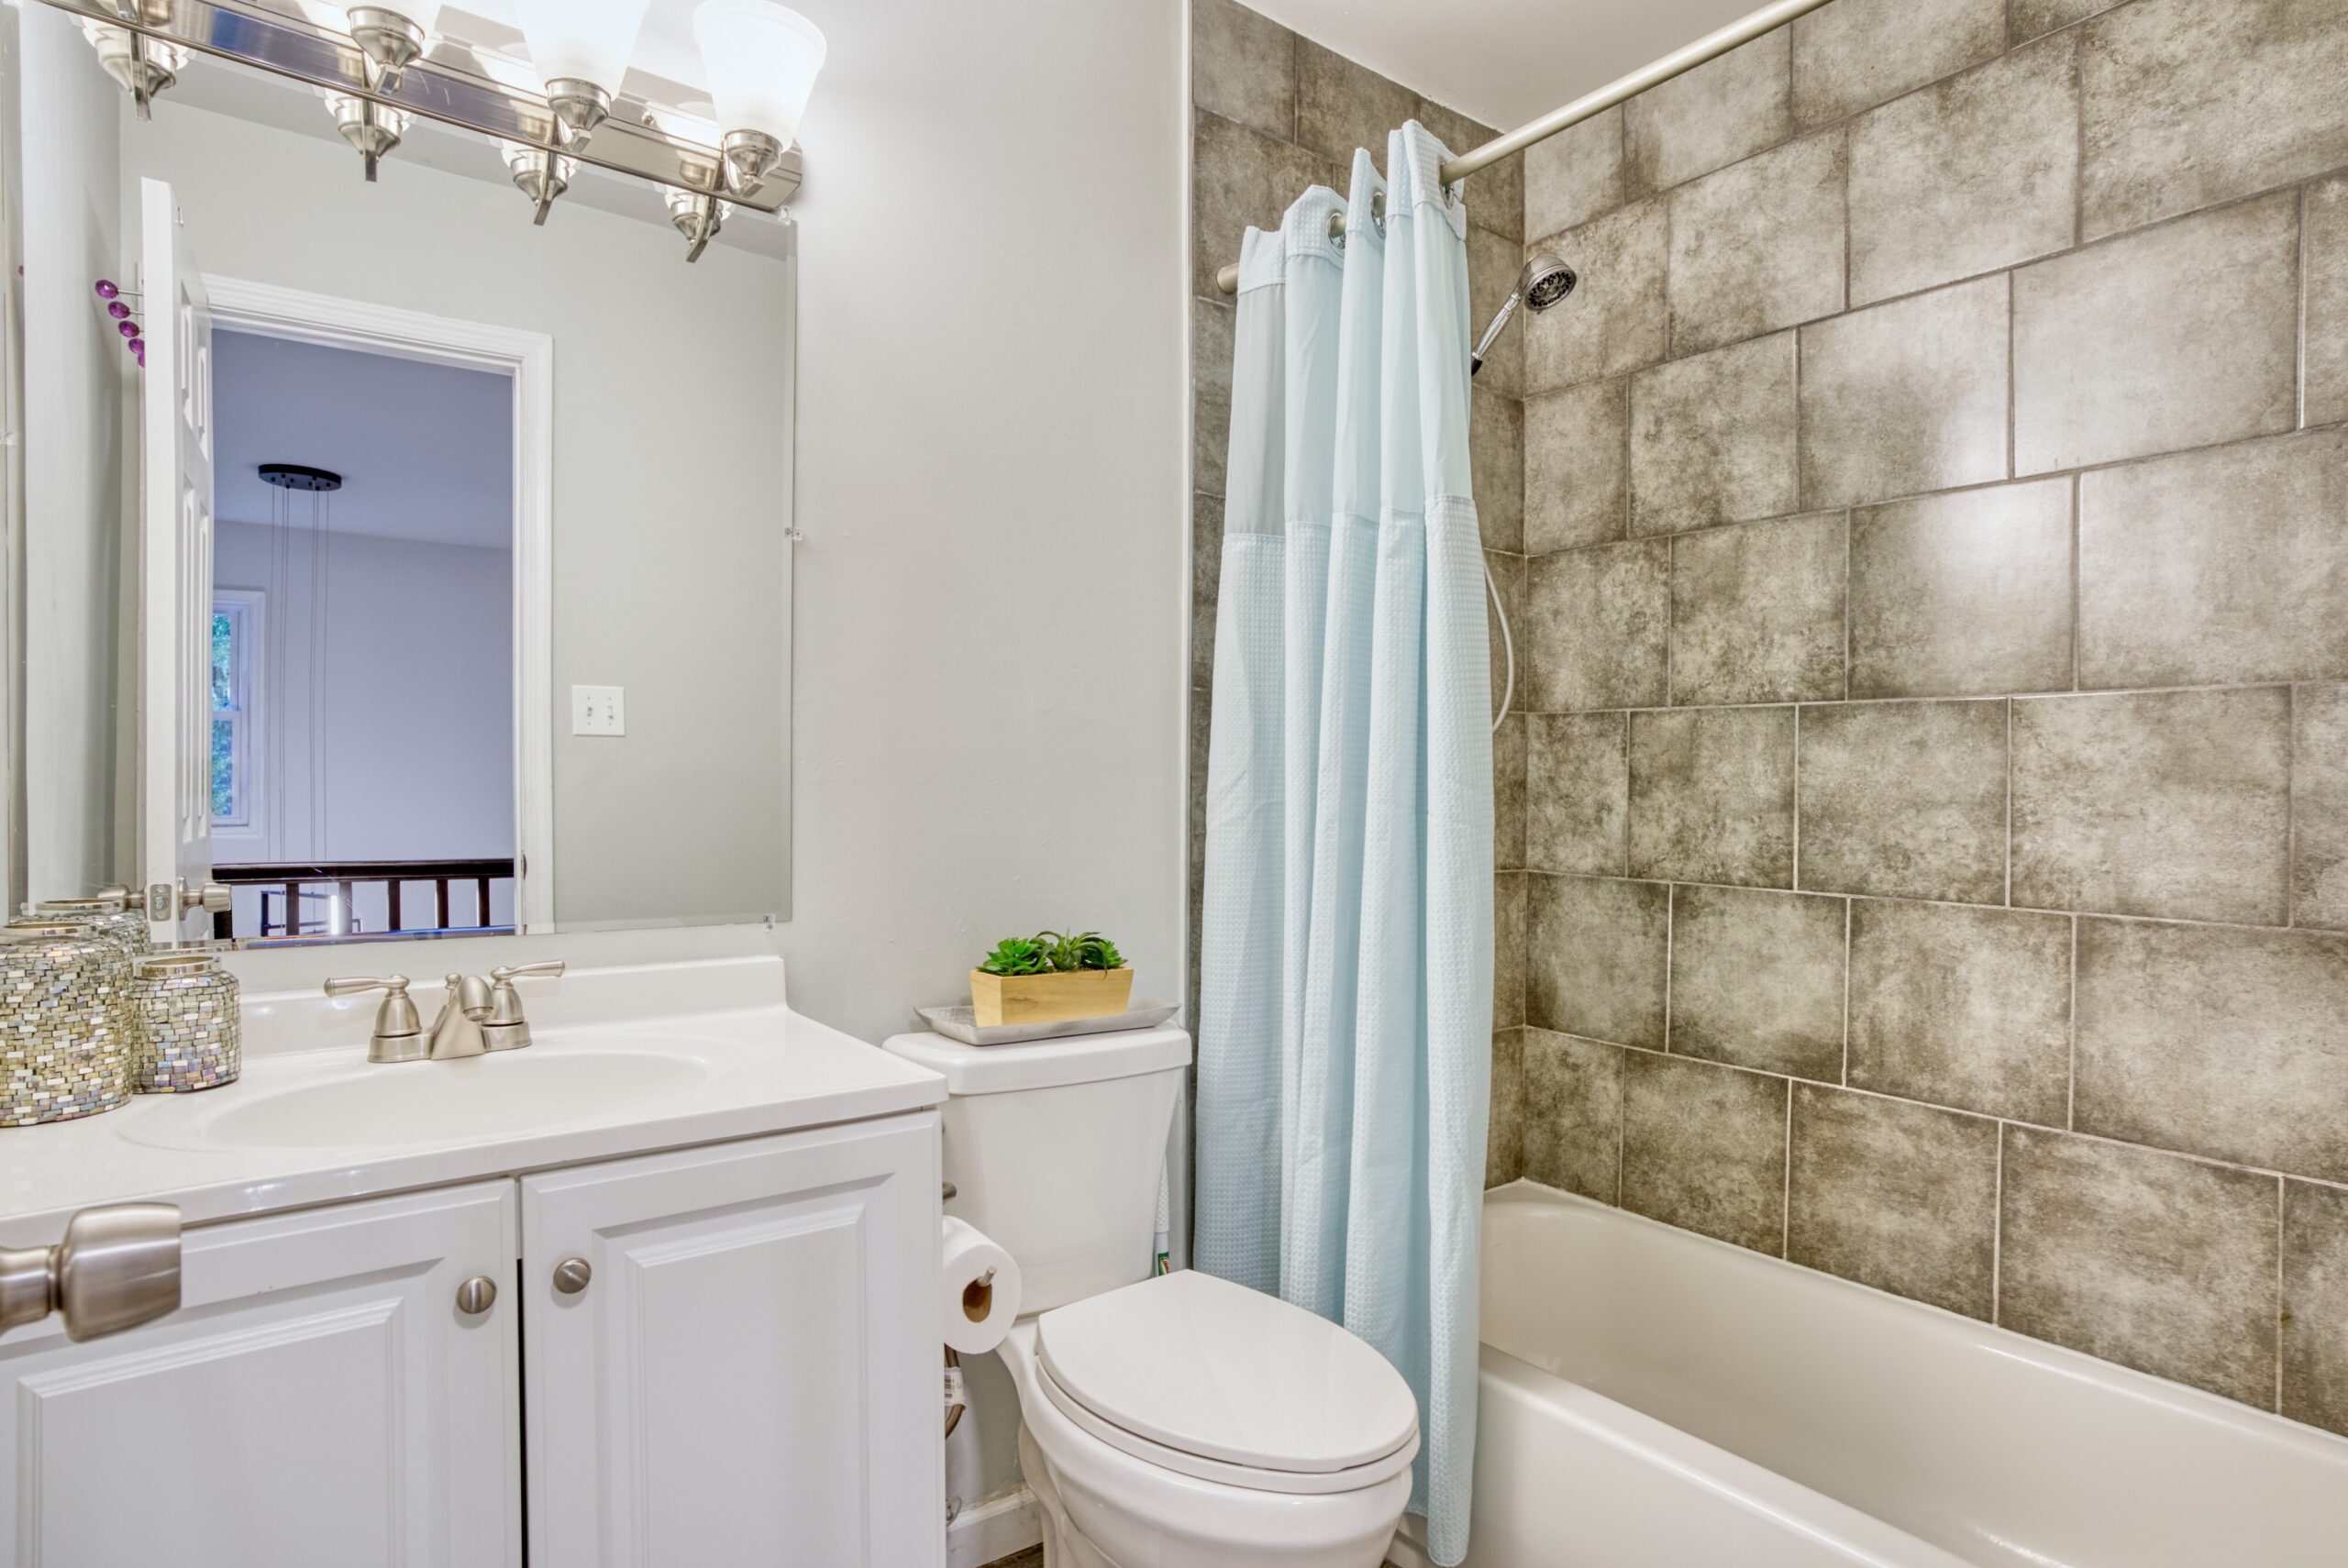 Interior professional photo of 9015 Longbow Rd - showing newly remodeled bathroom with large subway tiles in the shower that look like concrete